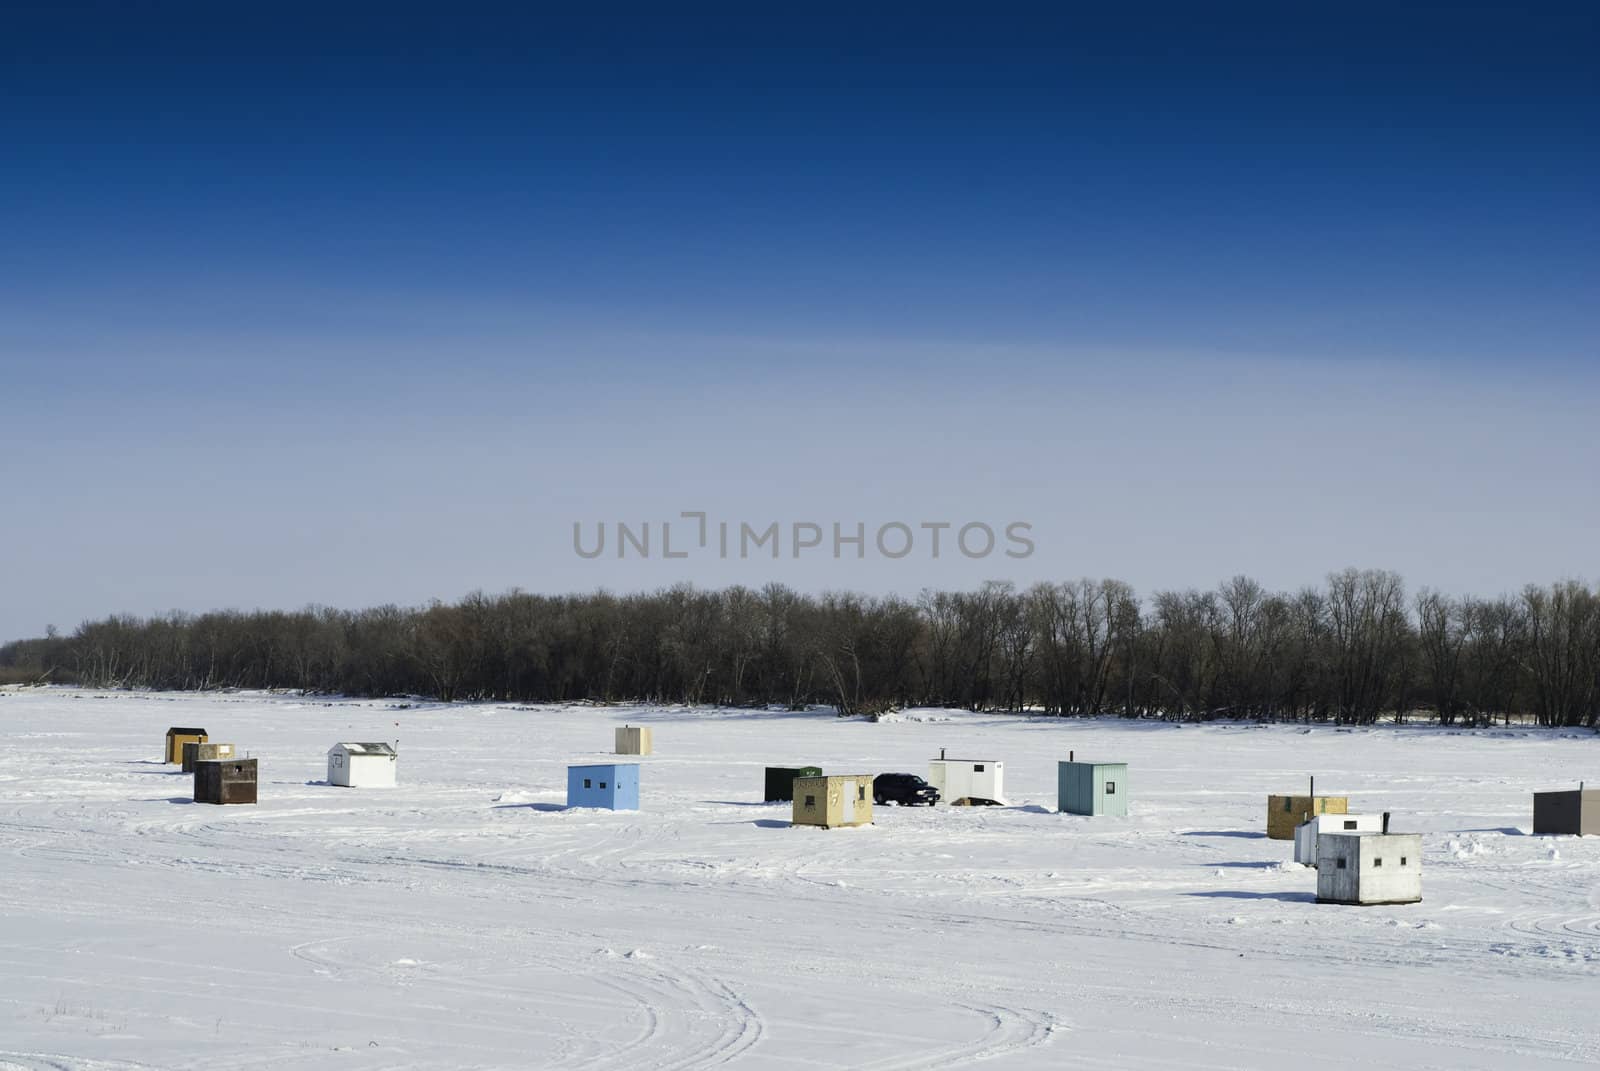 Scattered shacks used for ice fishing situated on the frozen "Red River" in Manitoba.